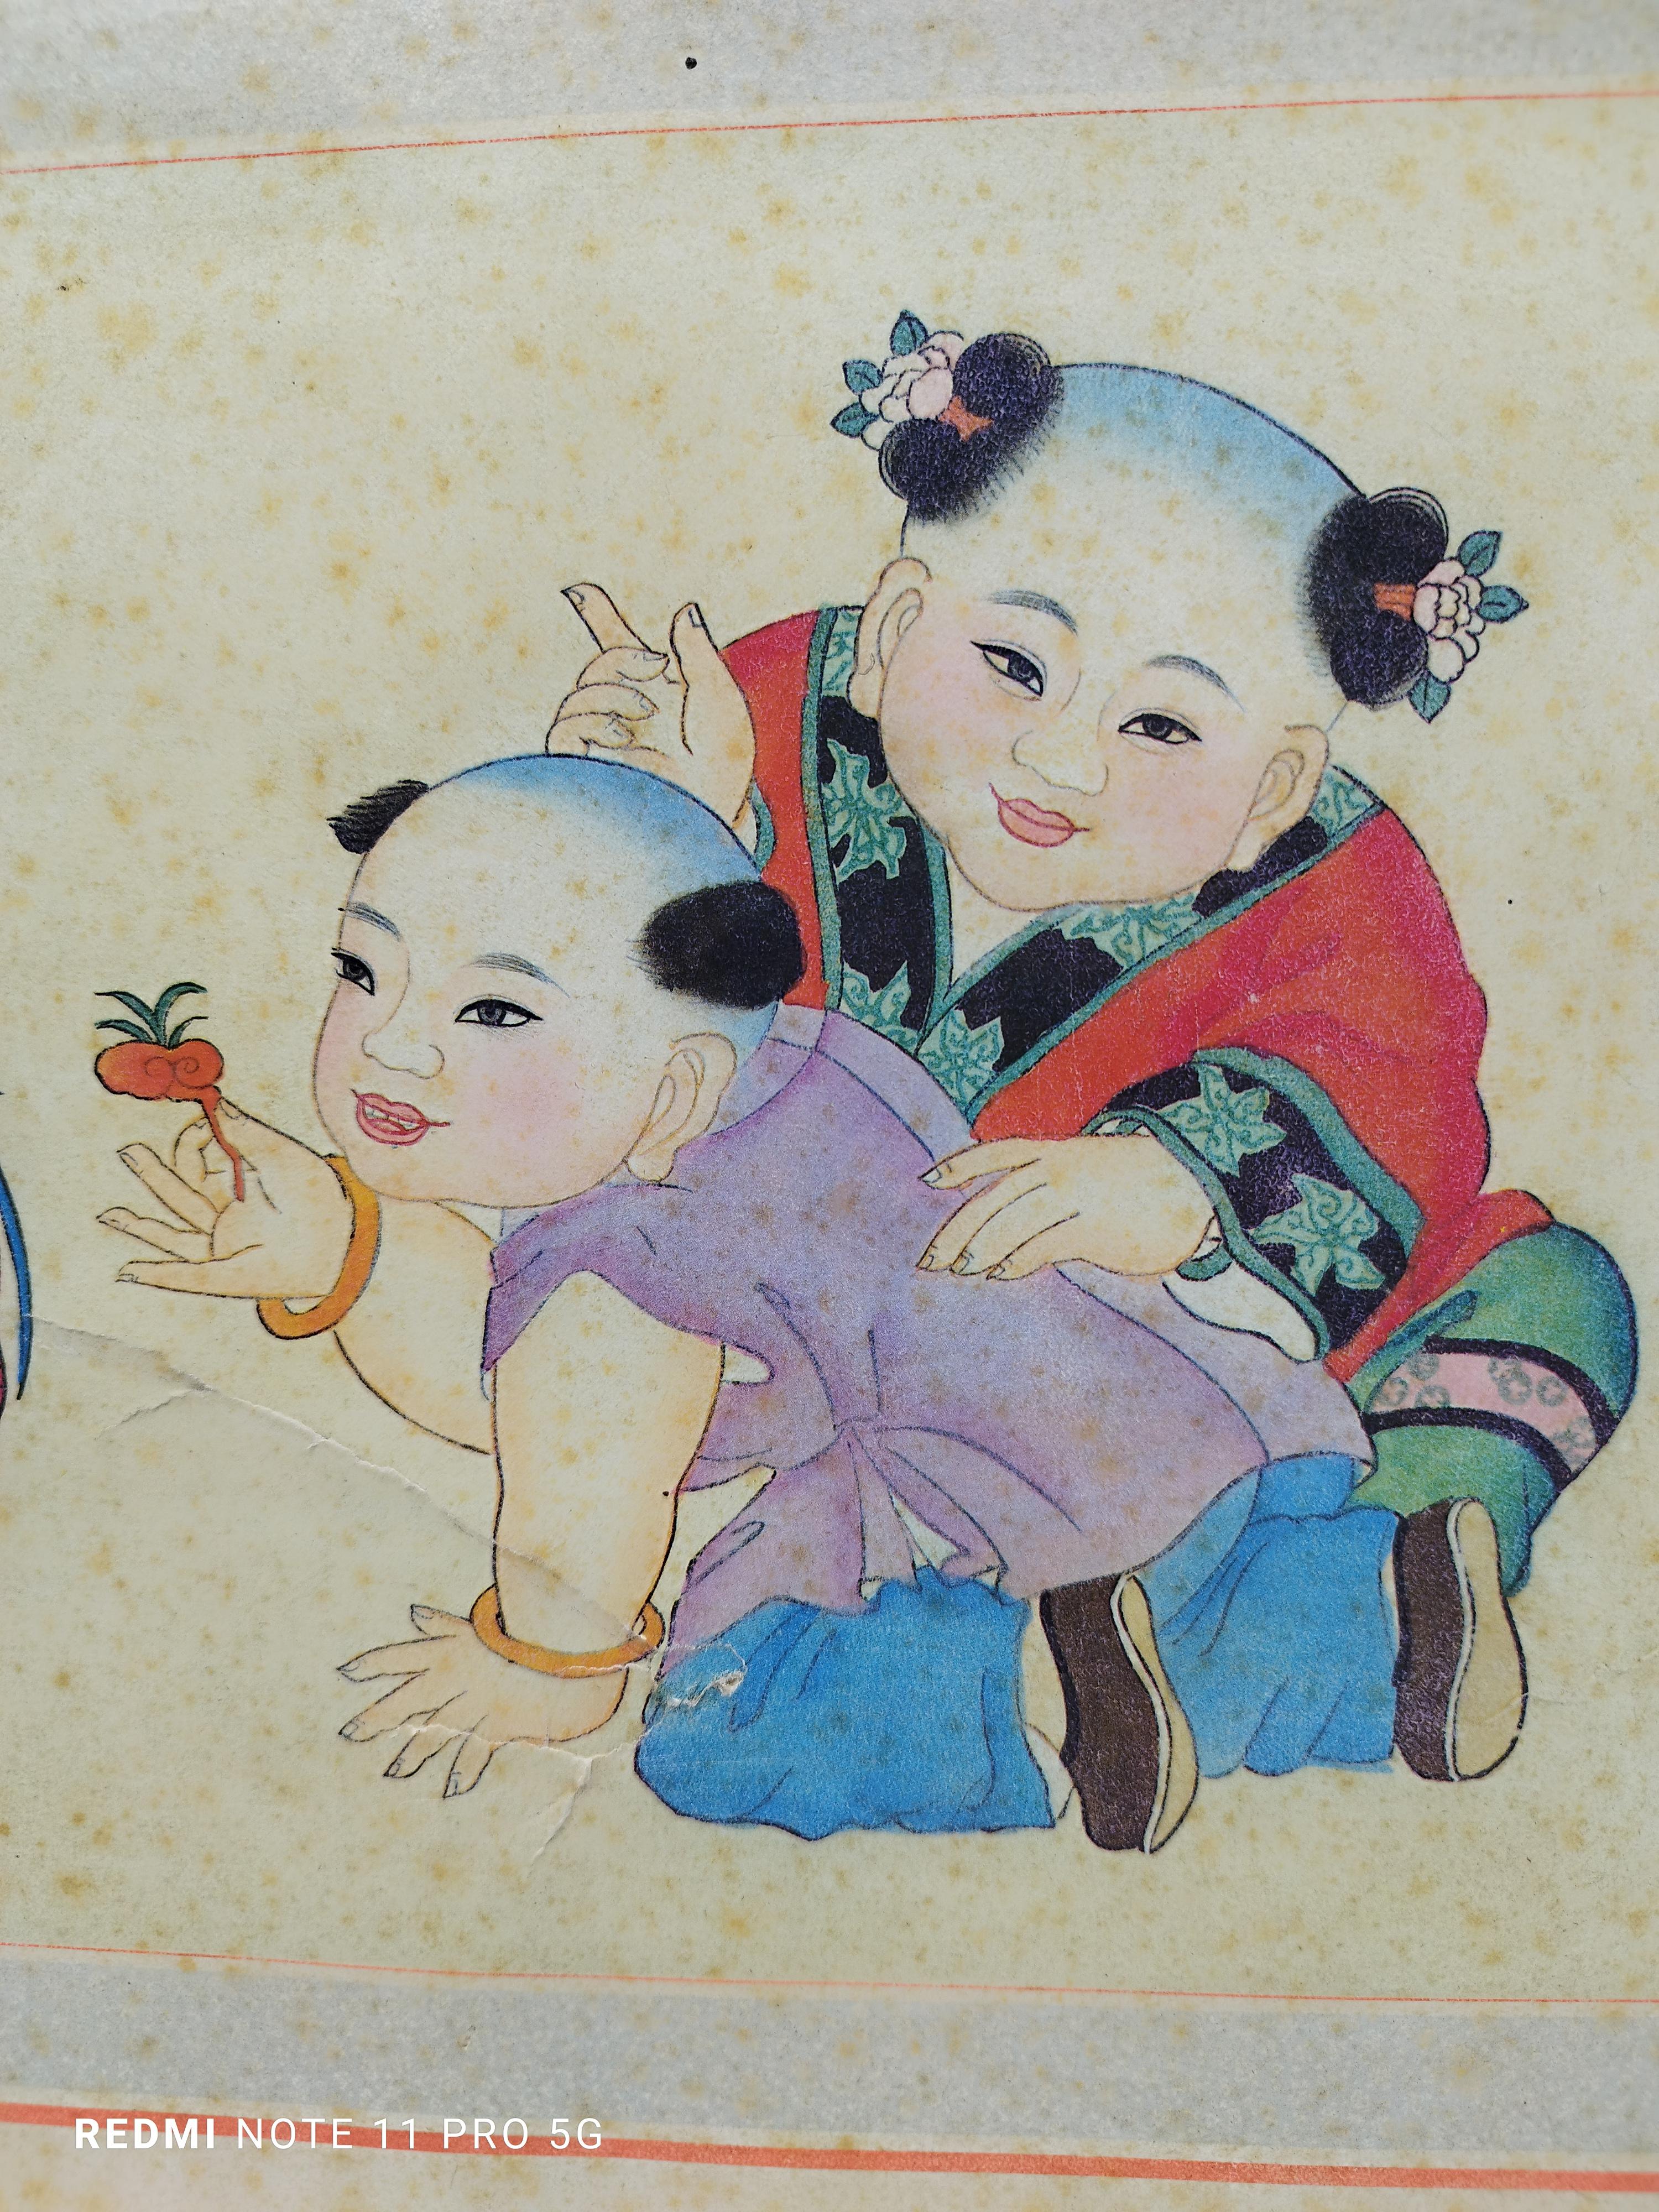 Chinese augural prints art edition Menarini Florence 1982. Linked to Chinese folk customs and daily life, the prints are popular ornaments for Lunar New Year decorations and express wishes for the New Year.